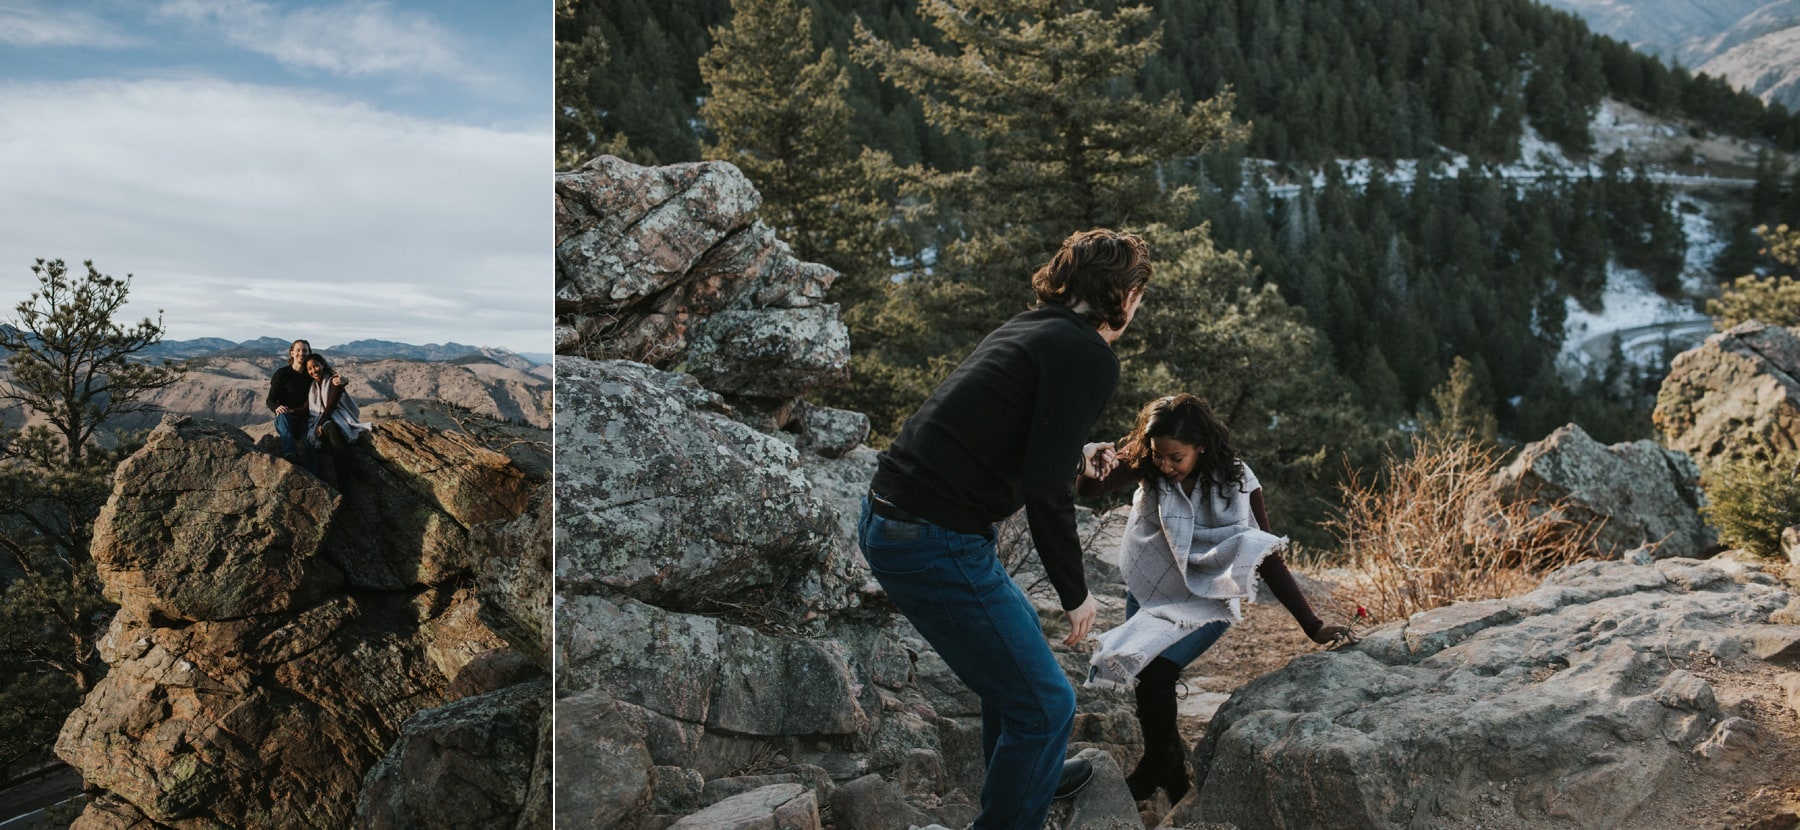 golden engagement photography, golden engagement photographer, lookout mountain engagement, texans in colorado, winter engagement, golden winter engagement, laughter during engagement session, candid engagement photos